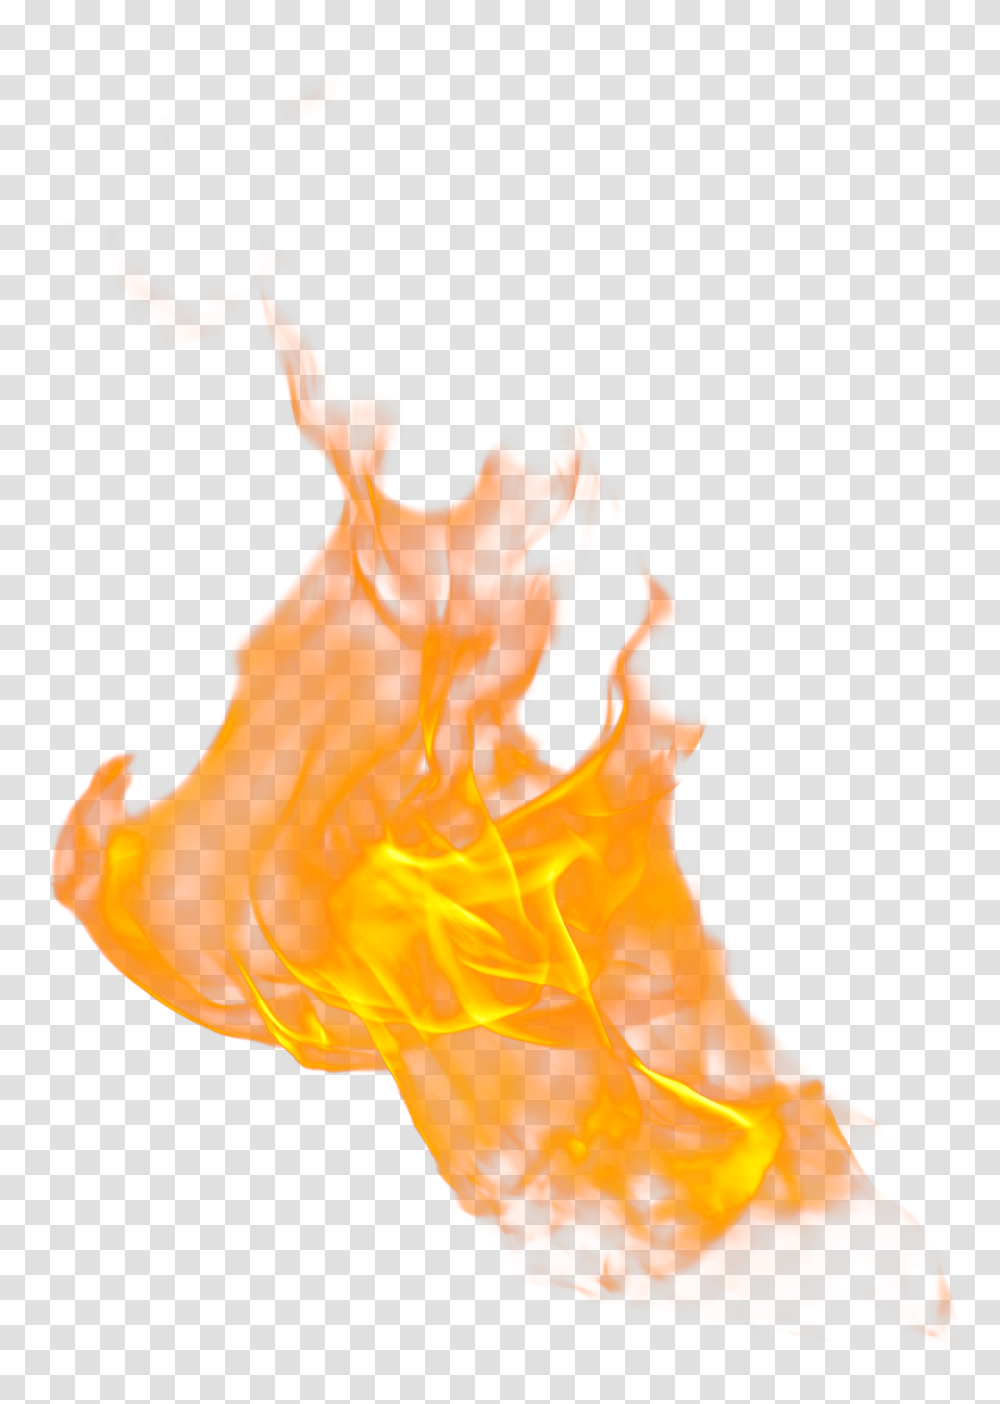 Fire Flame Image For Free Download Portable Network Graphics, Bonfire Transparent Png